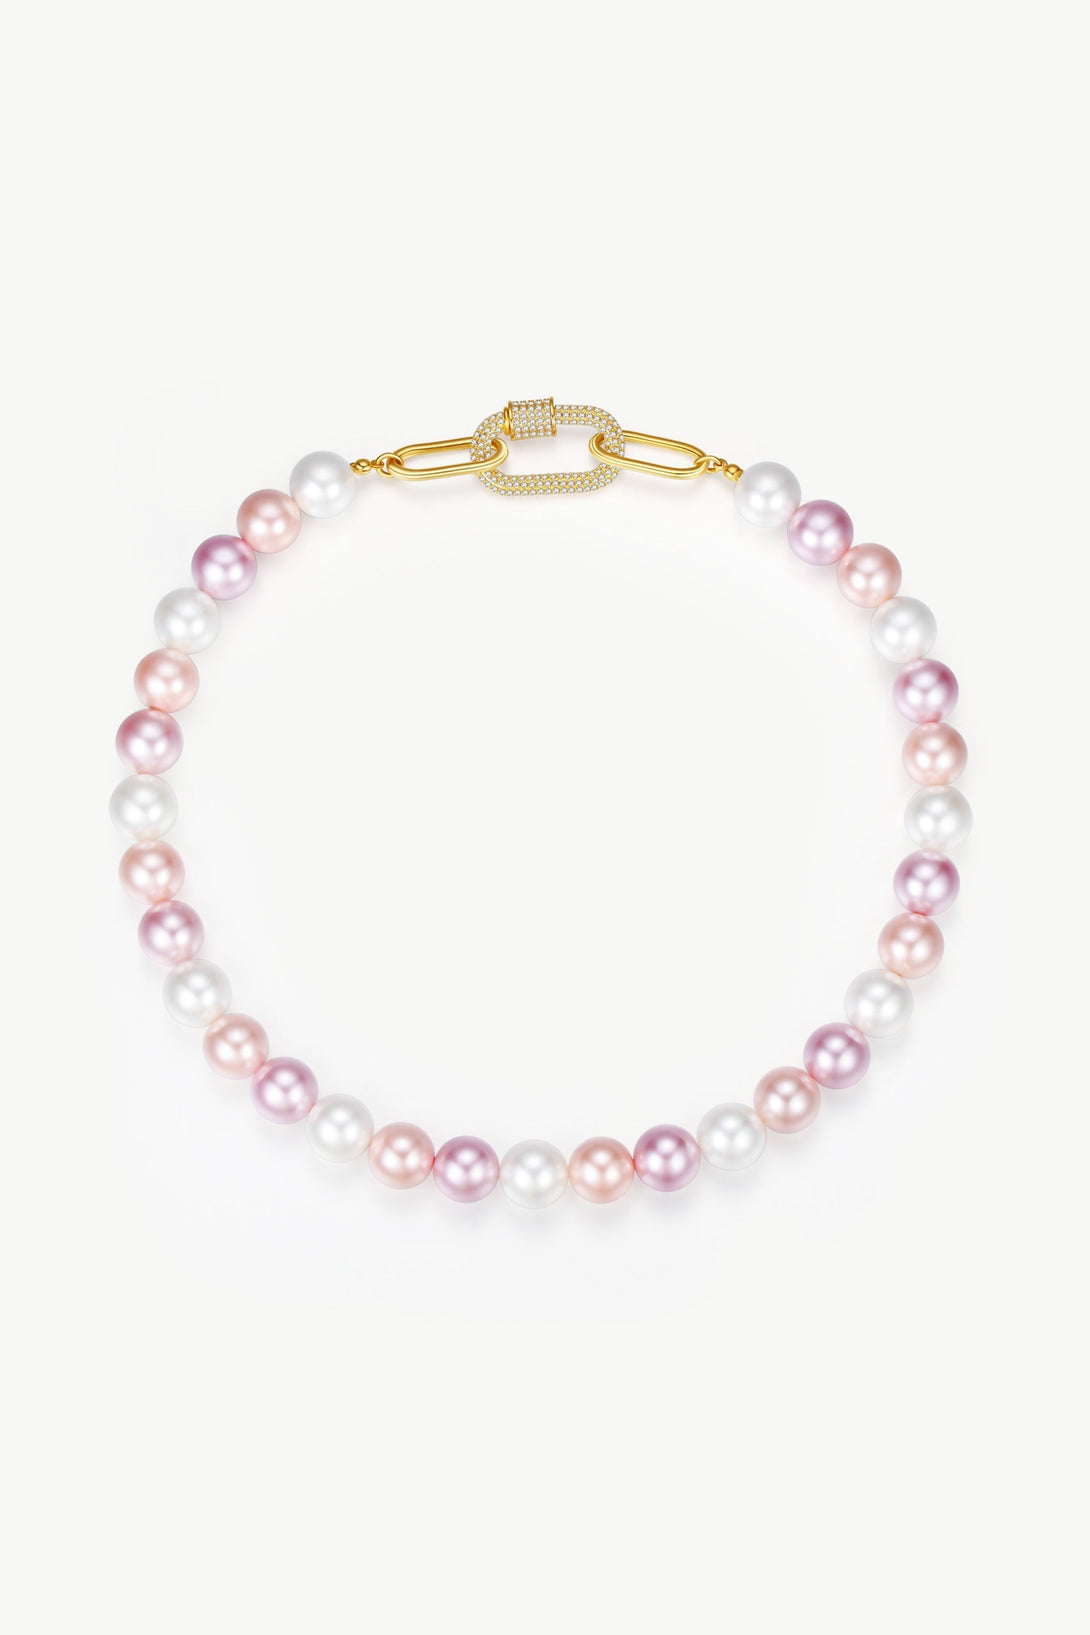 Pink Shell Pearl Necklace with Gem-Encrusted Carabiner Lock (Small) - Classicharms